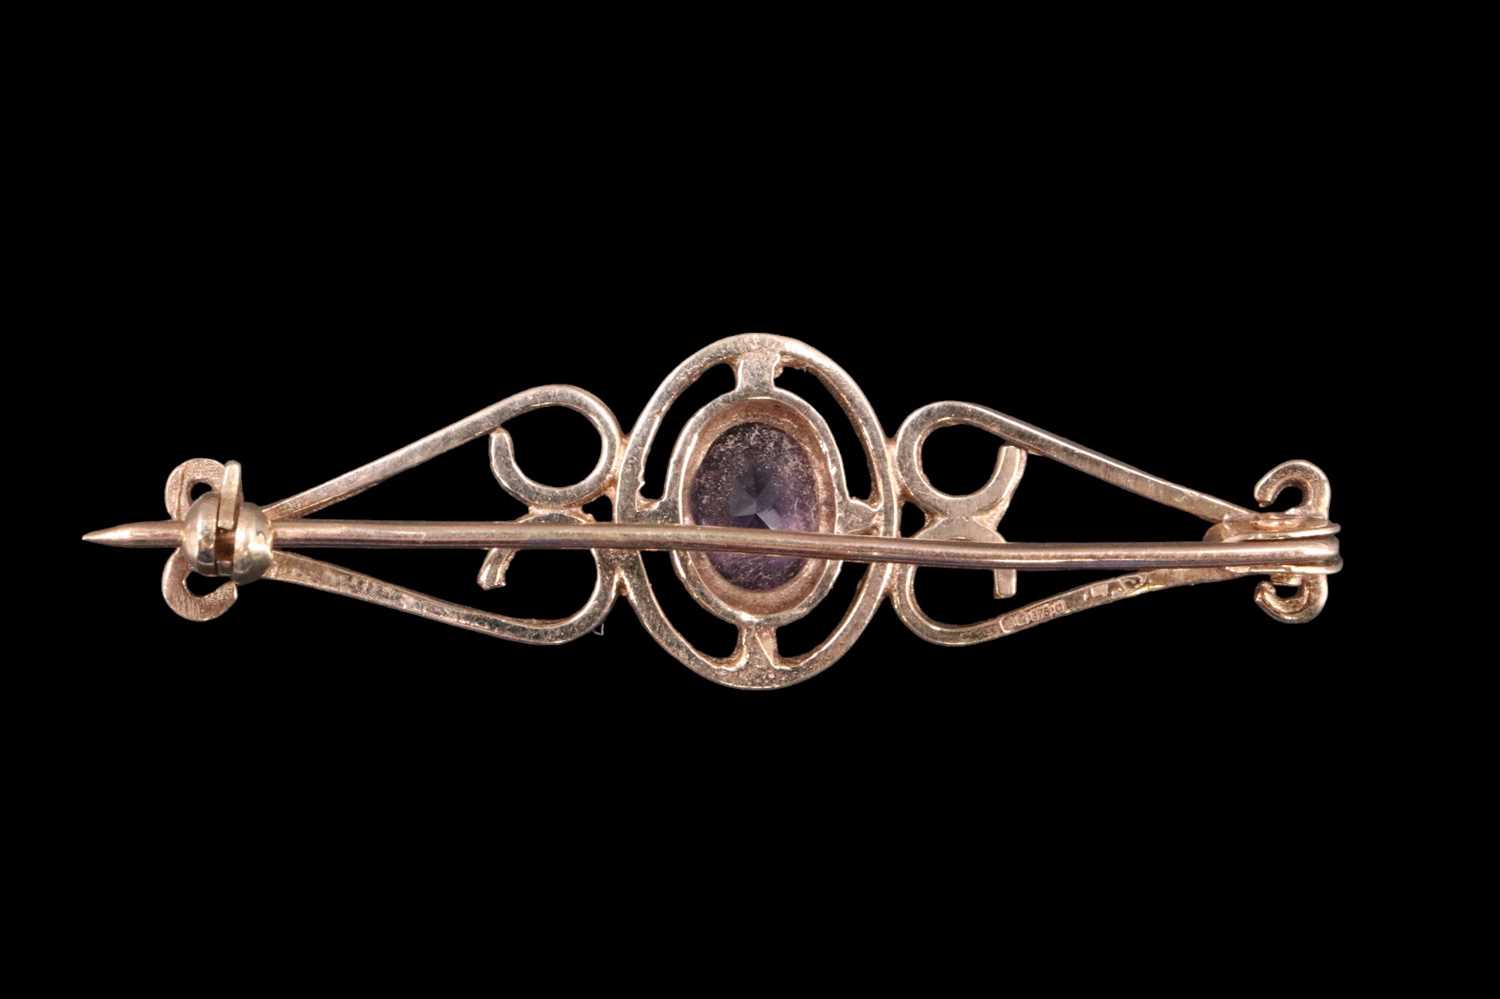 An amethyst and 9 ct gold brooch, the oval (approximately 1.25 carats) in a bezel setting within - Image 2 of 3